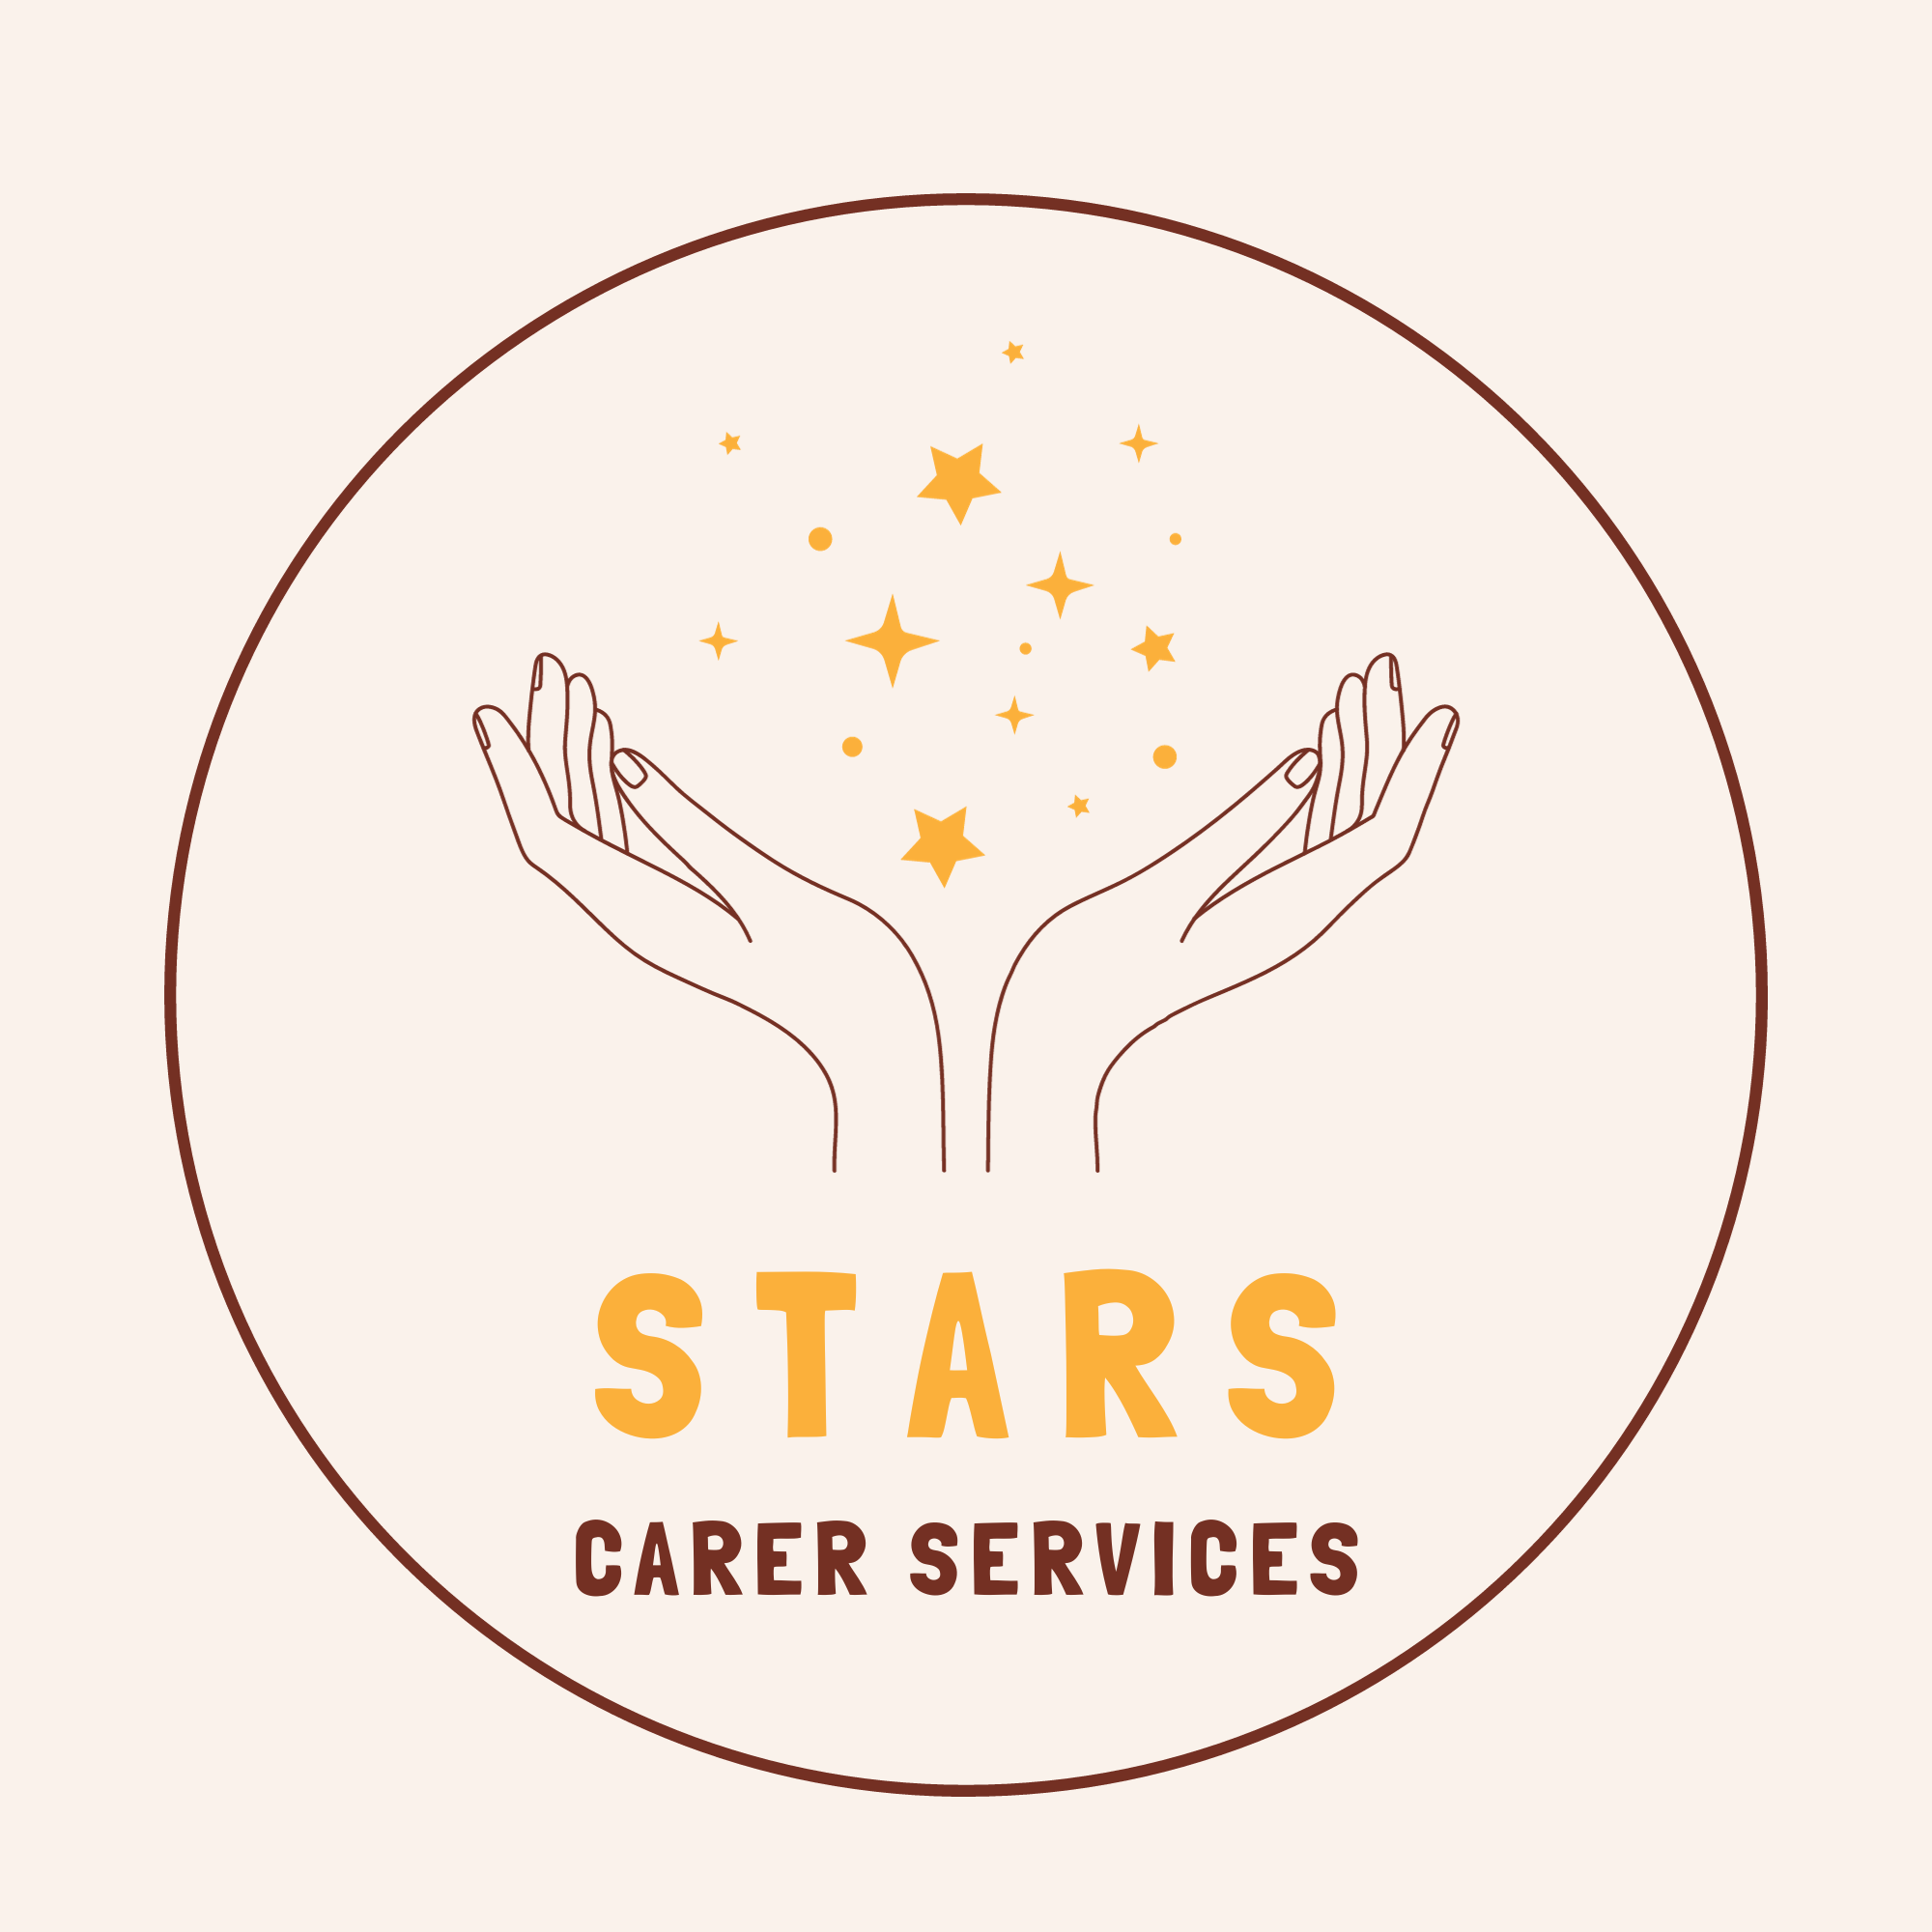 STARS Carer Services logo is a circle, with a mix of autumnal colours, inside the circle is a pair of hands reaching for the sky, holding some stars with the words STARS Carer Services underneath